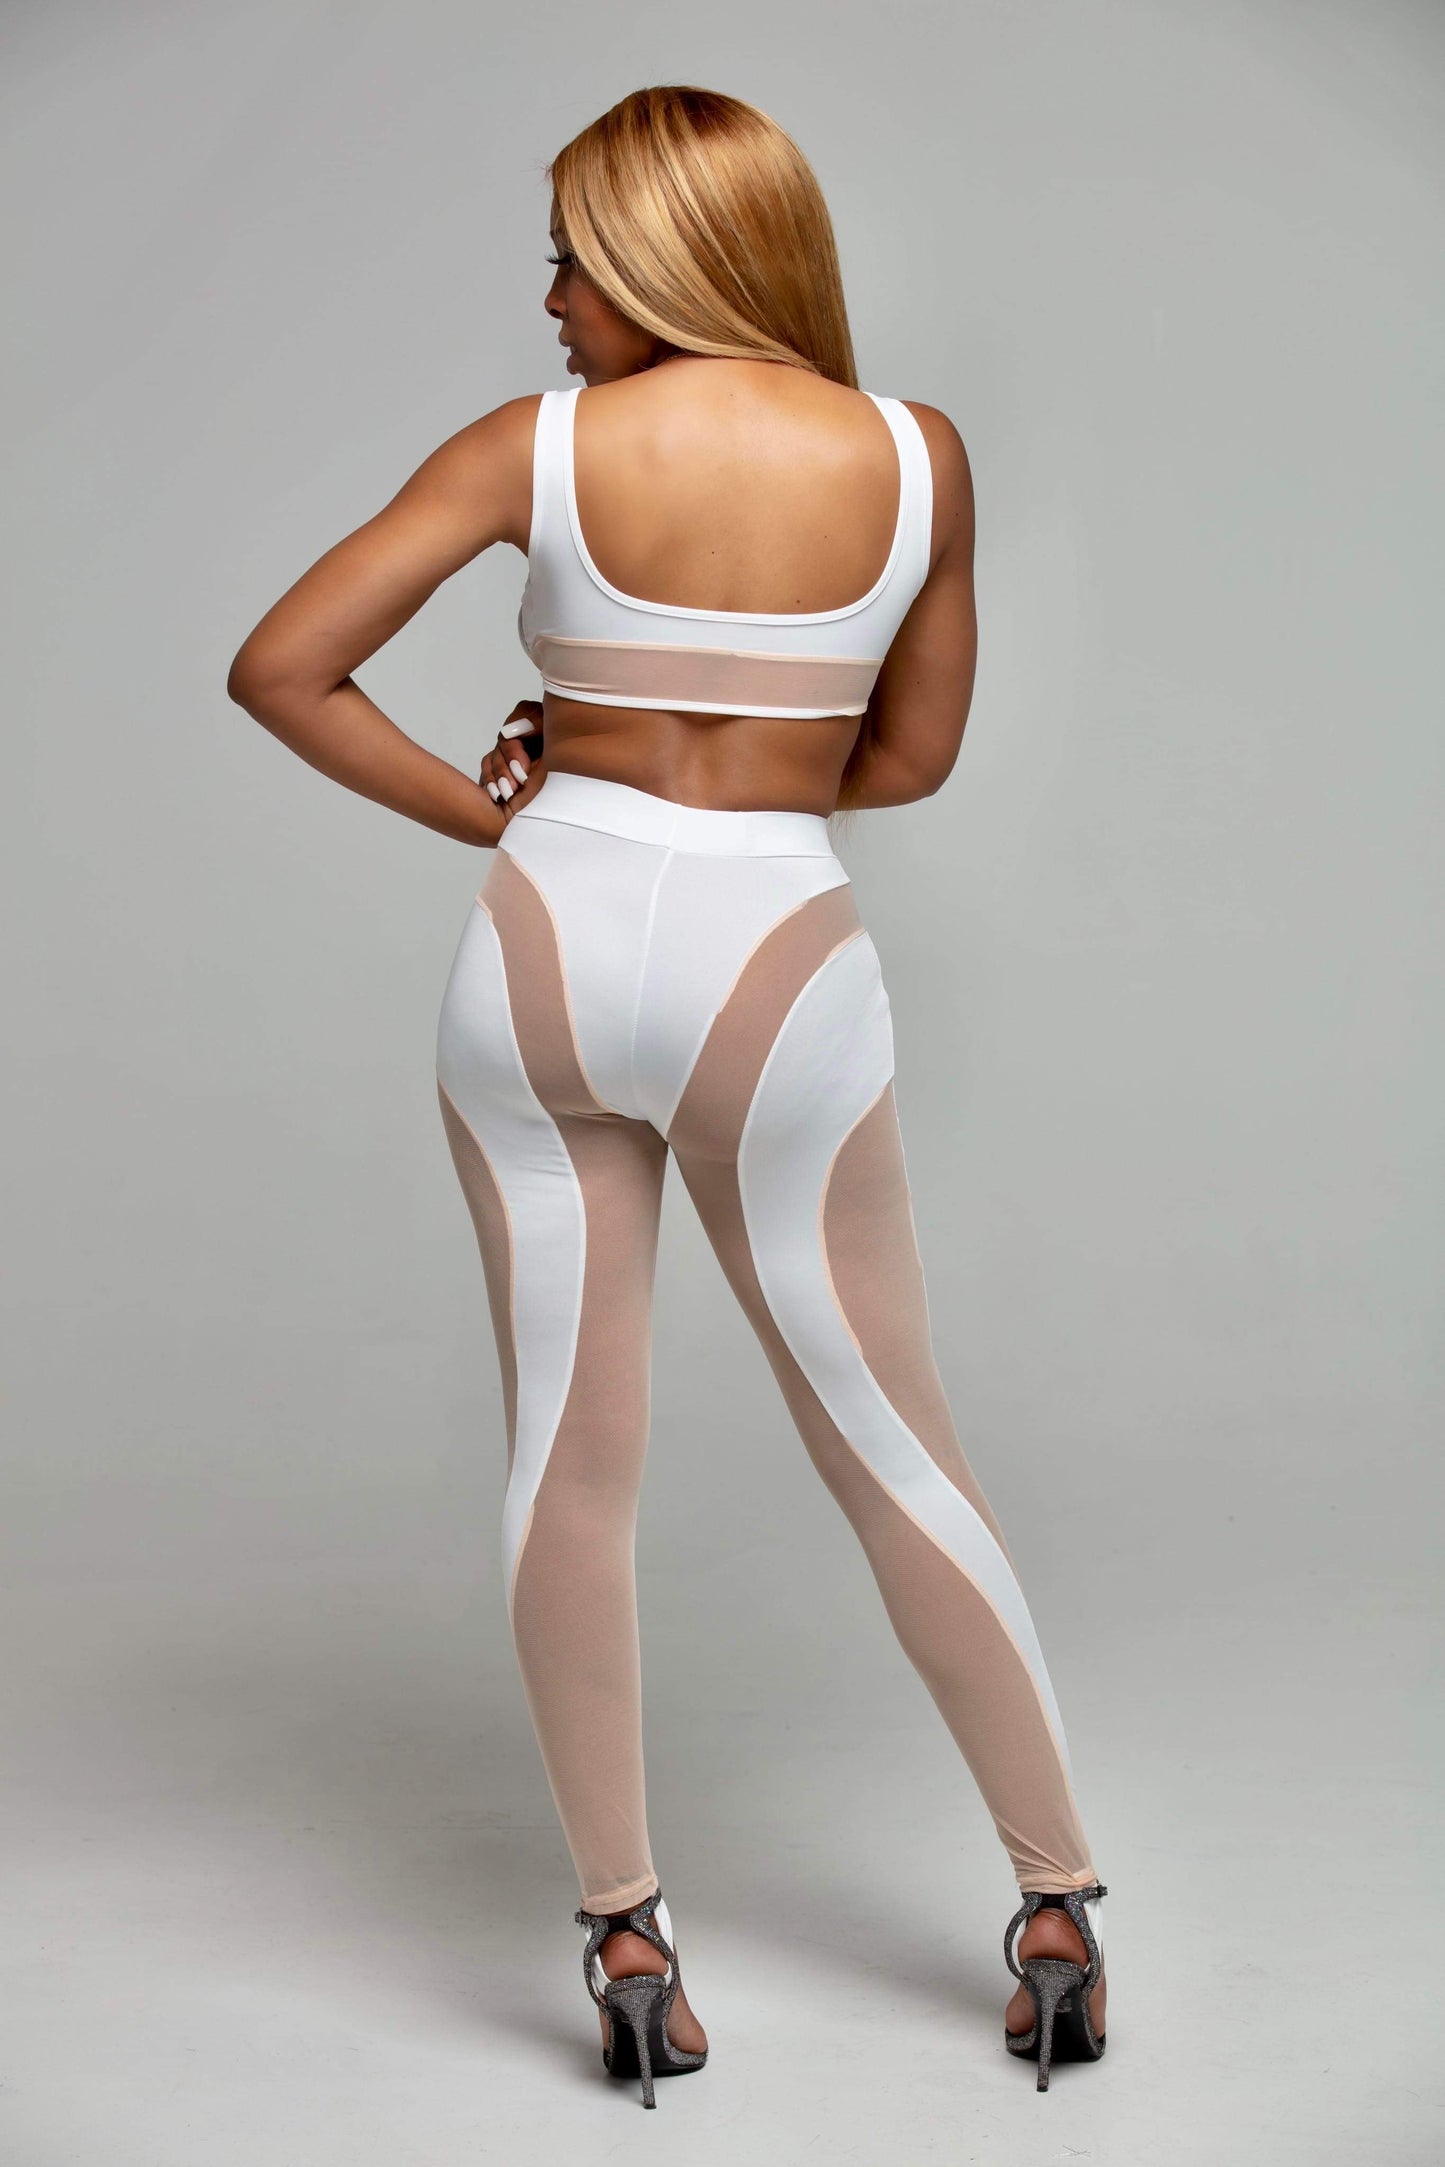 Women's Trophy Mesh Cutout Pants Set - BaeBekillinem Boutique- Polyester/ Spandex- White/ Pink/ Black- night- club- mugler- see through- poster girl- party- event- stretch